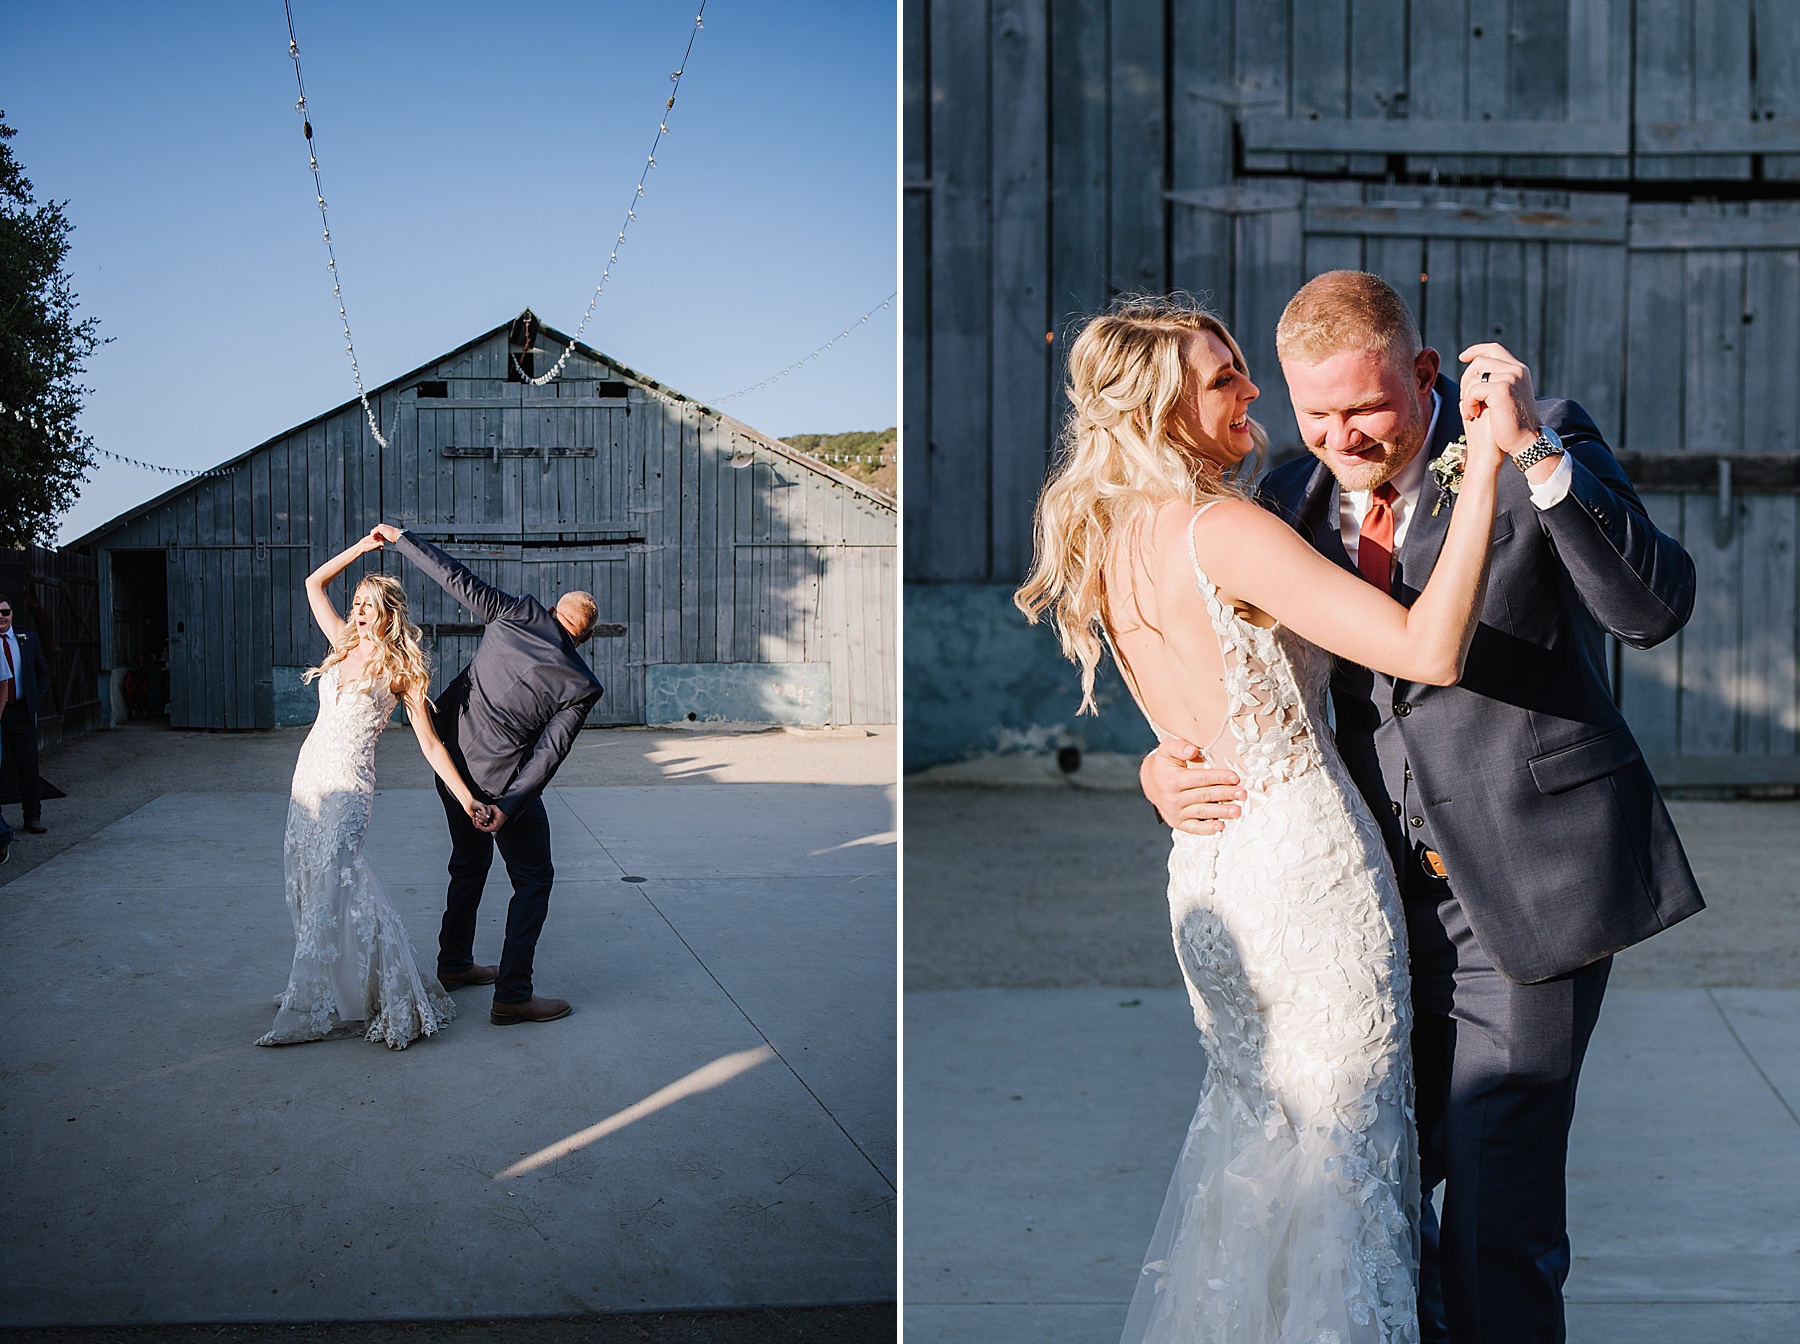 Loma Grande Ranch Summer Wedding with Terracotta and Navy for Taylor & Chase